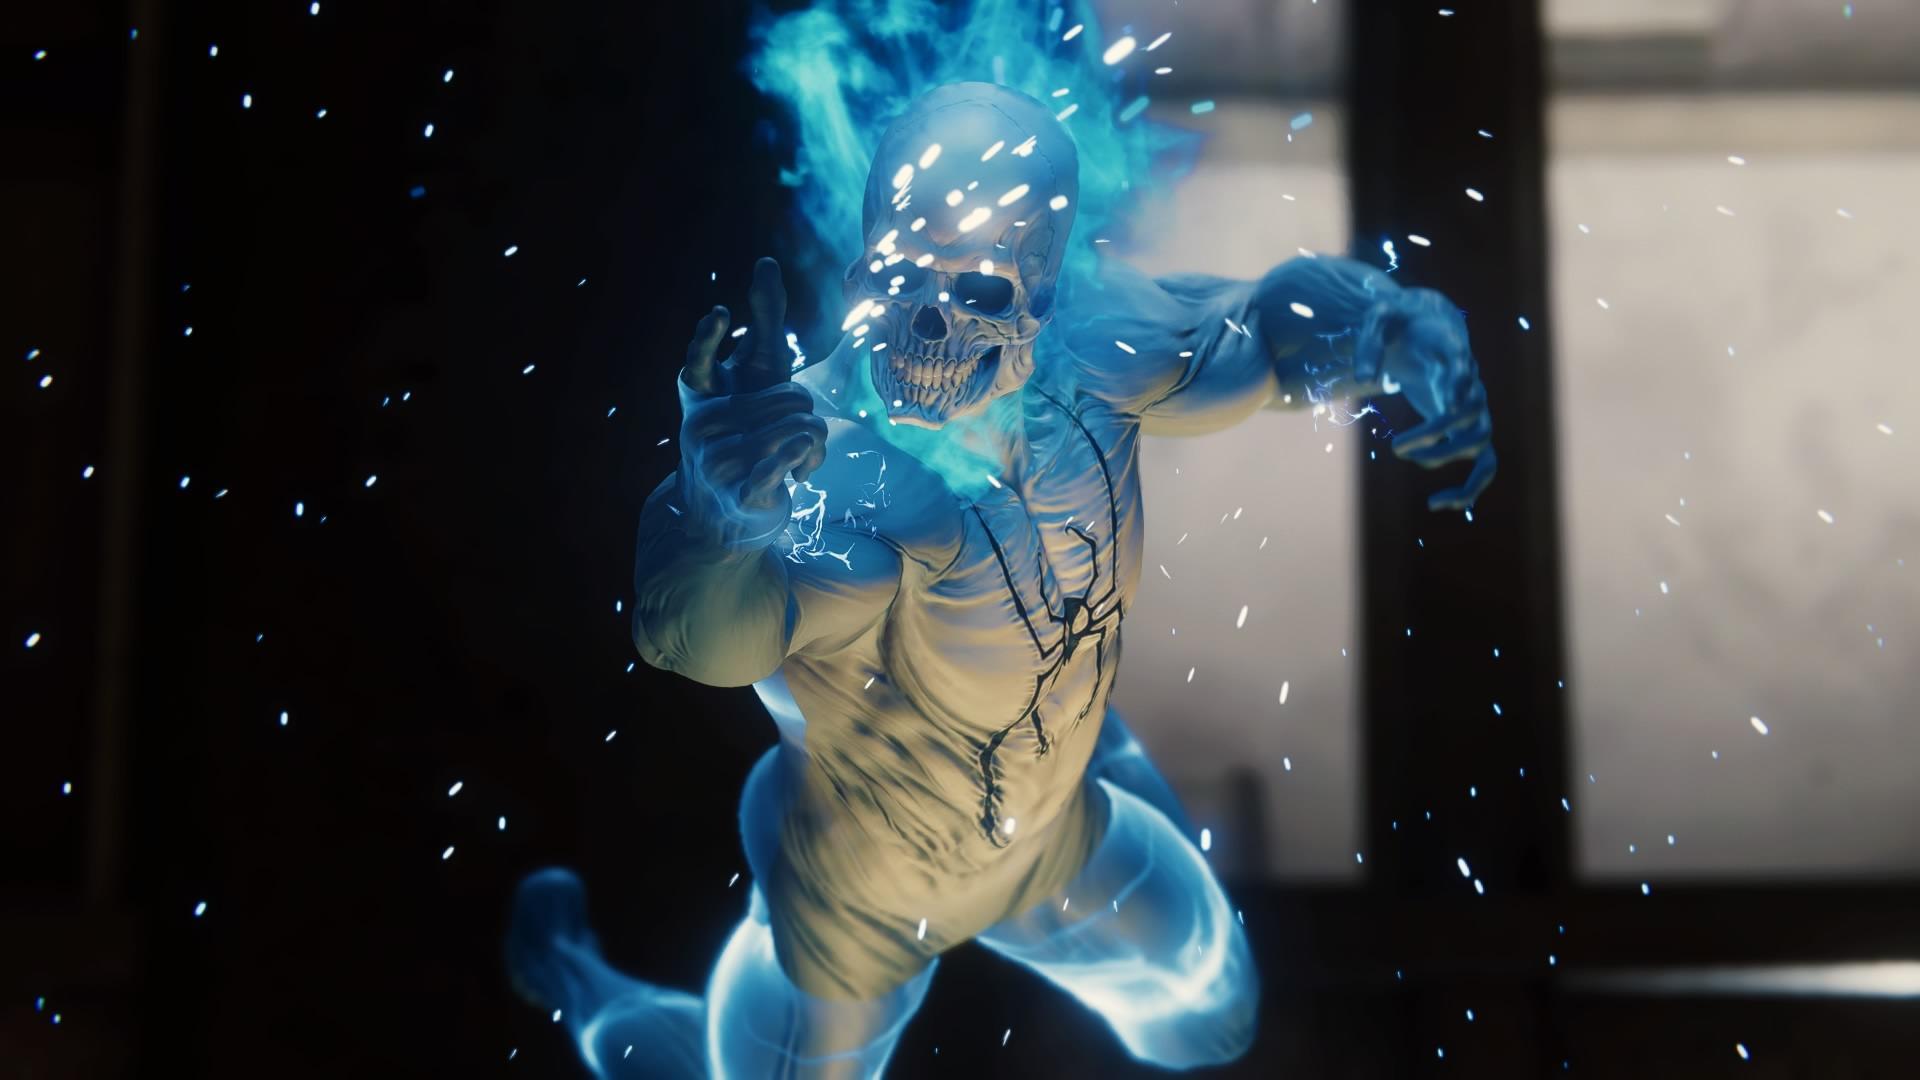 Ghost Spider is underrated